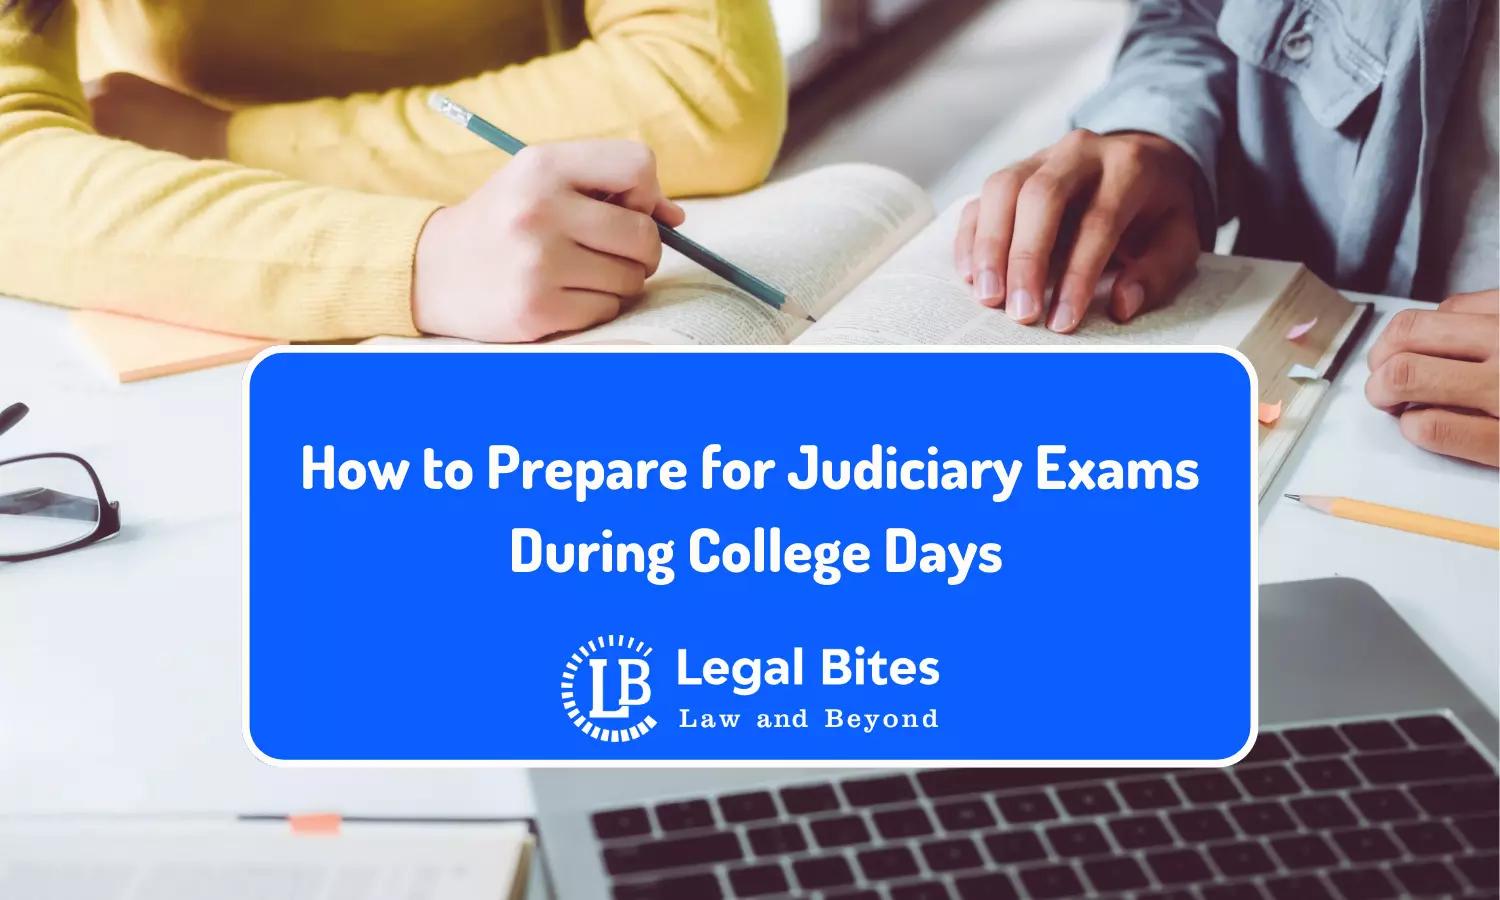 How to Prepare for Judiciary Exams During College Days